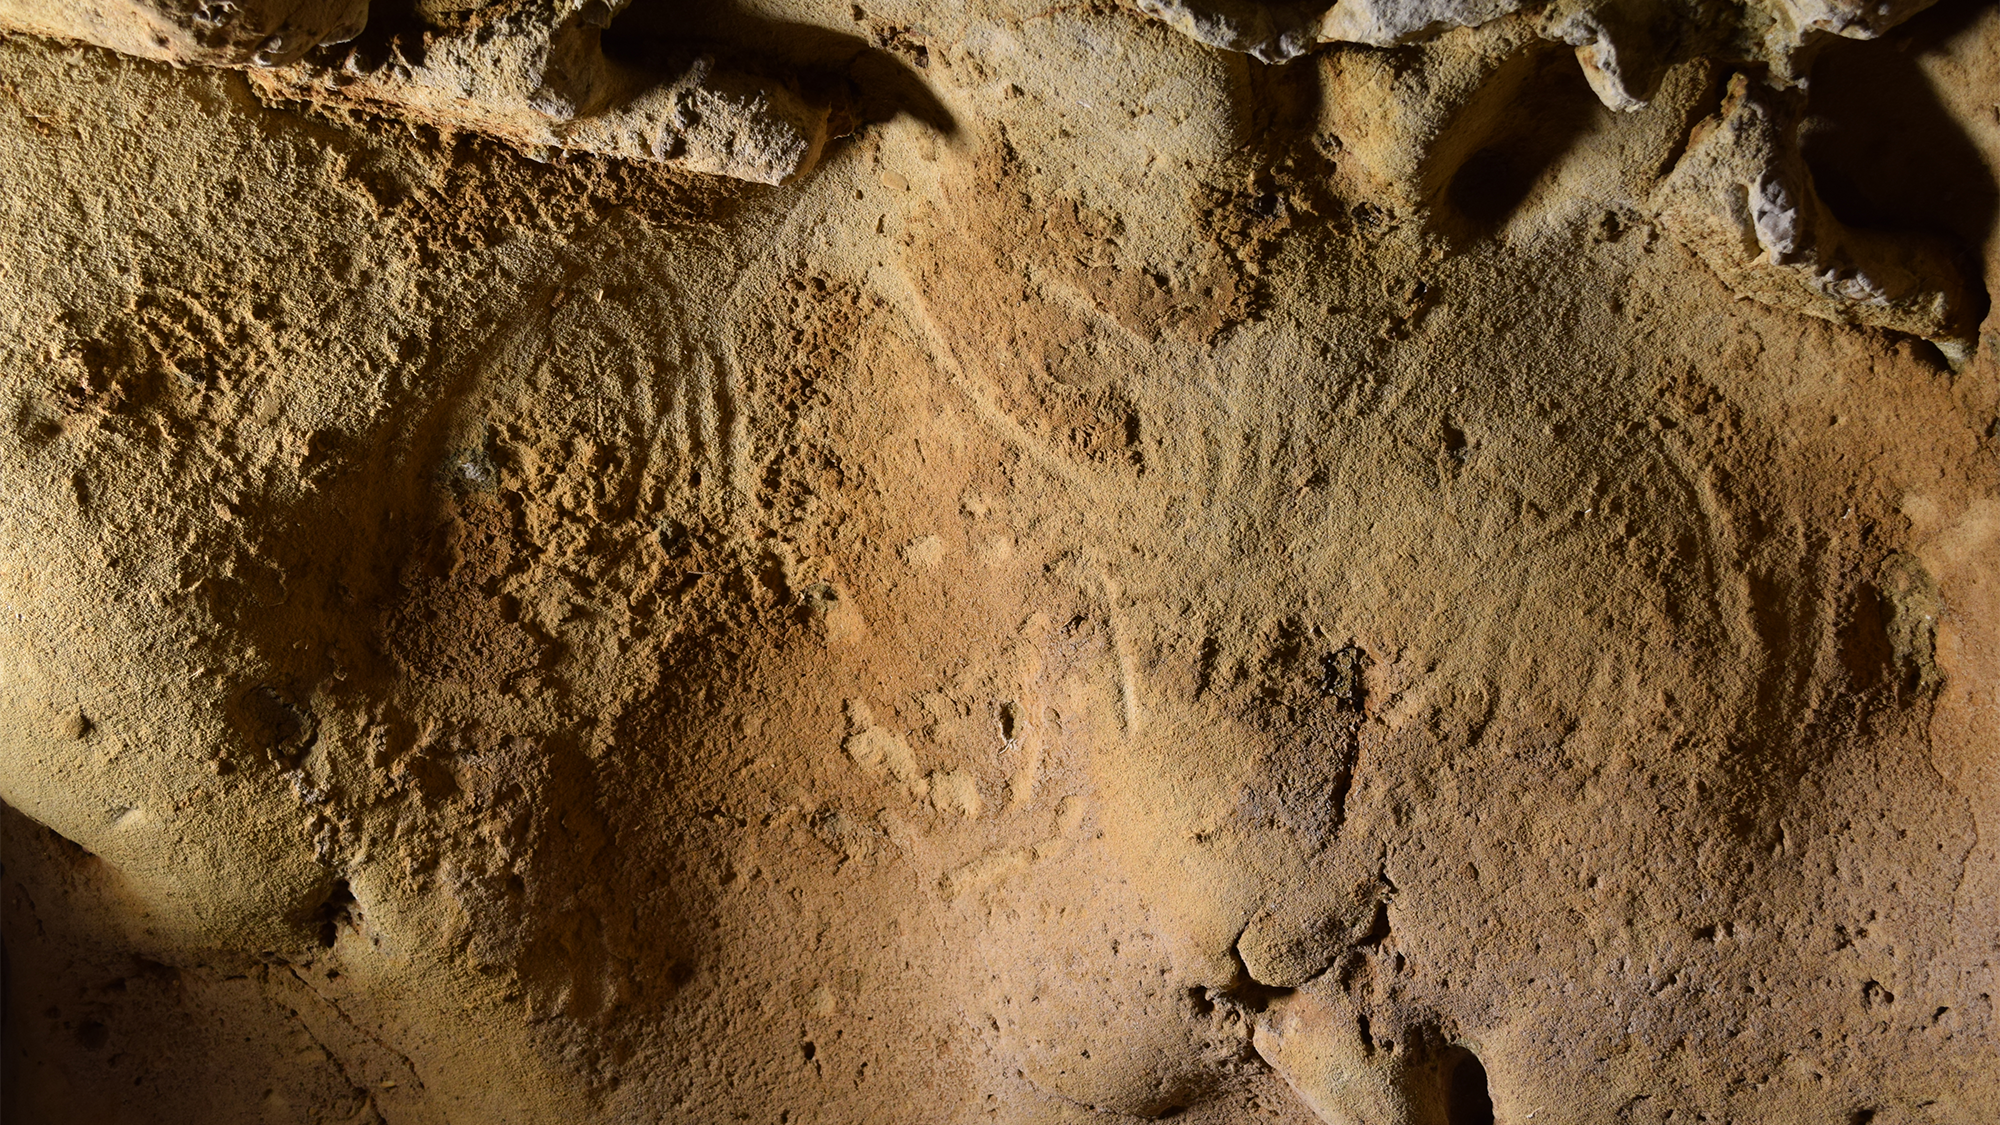 Neanderthals were likely creating art 57,000 years ago